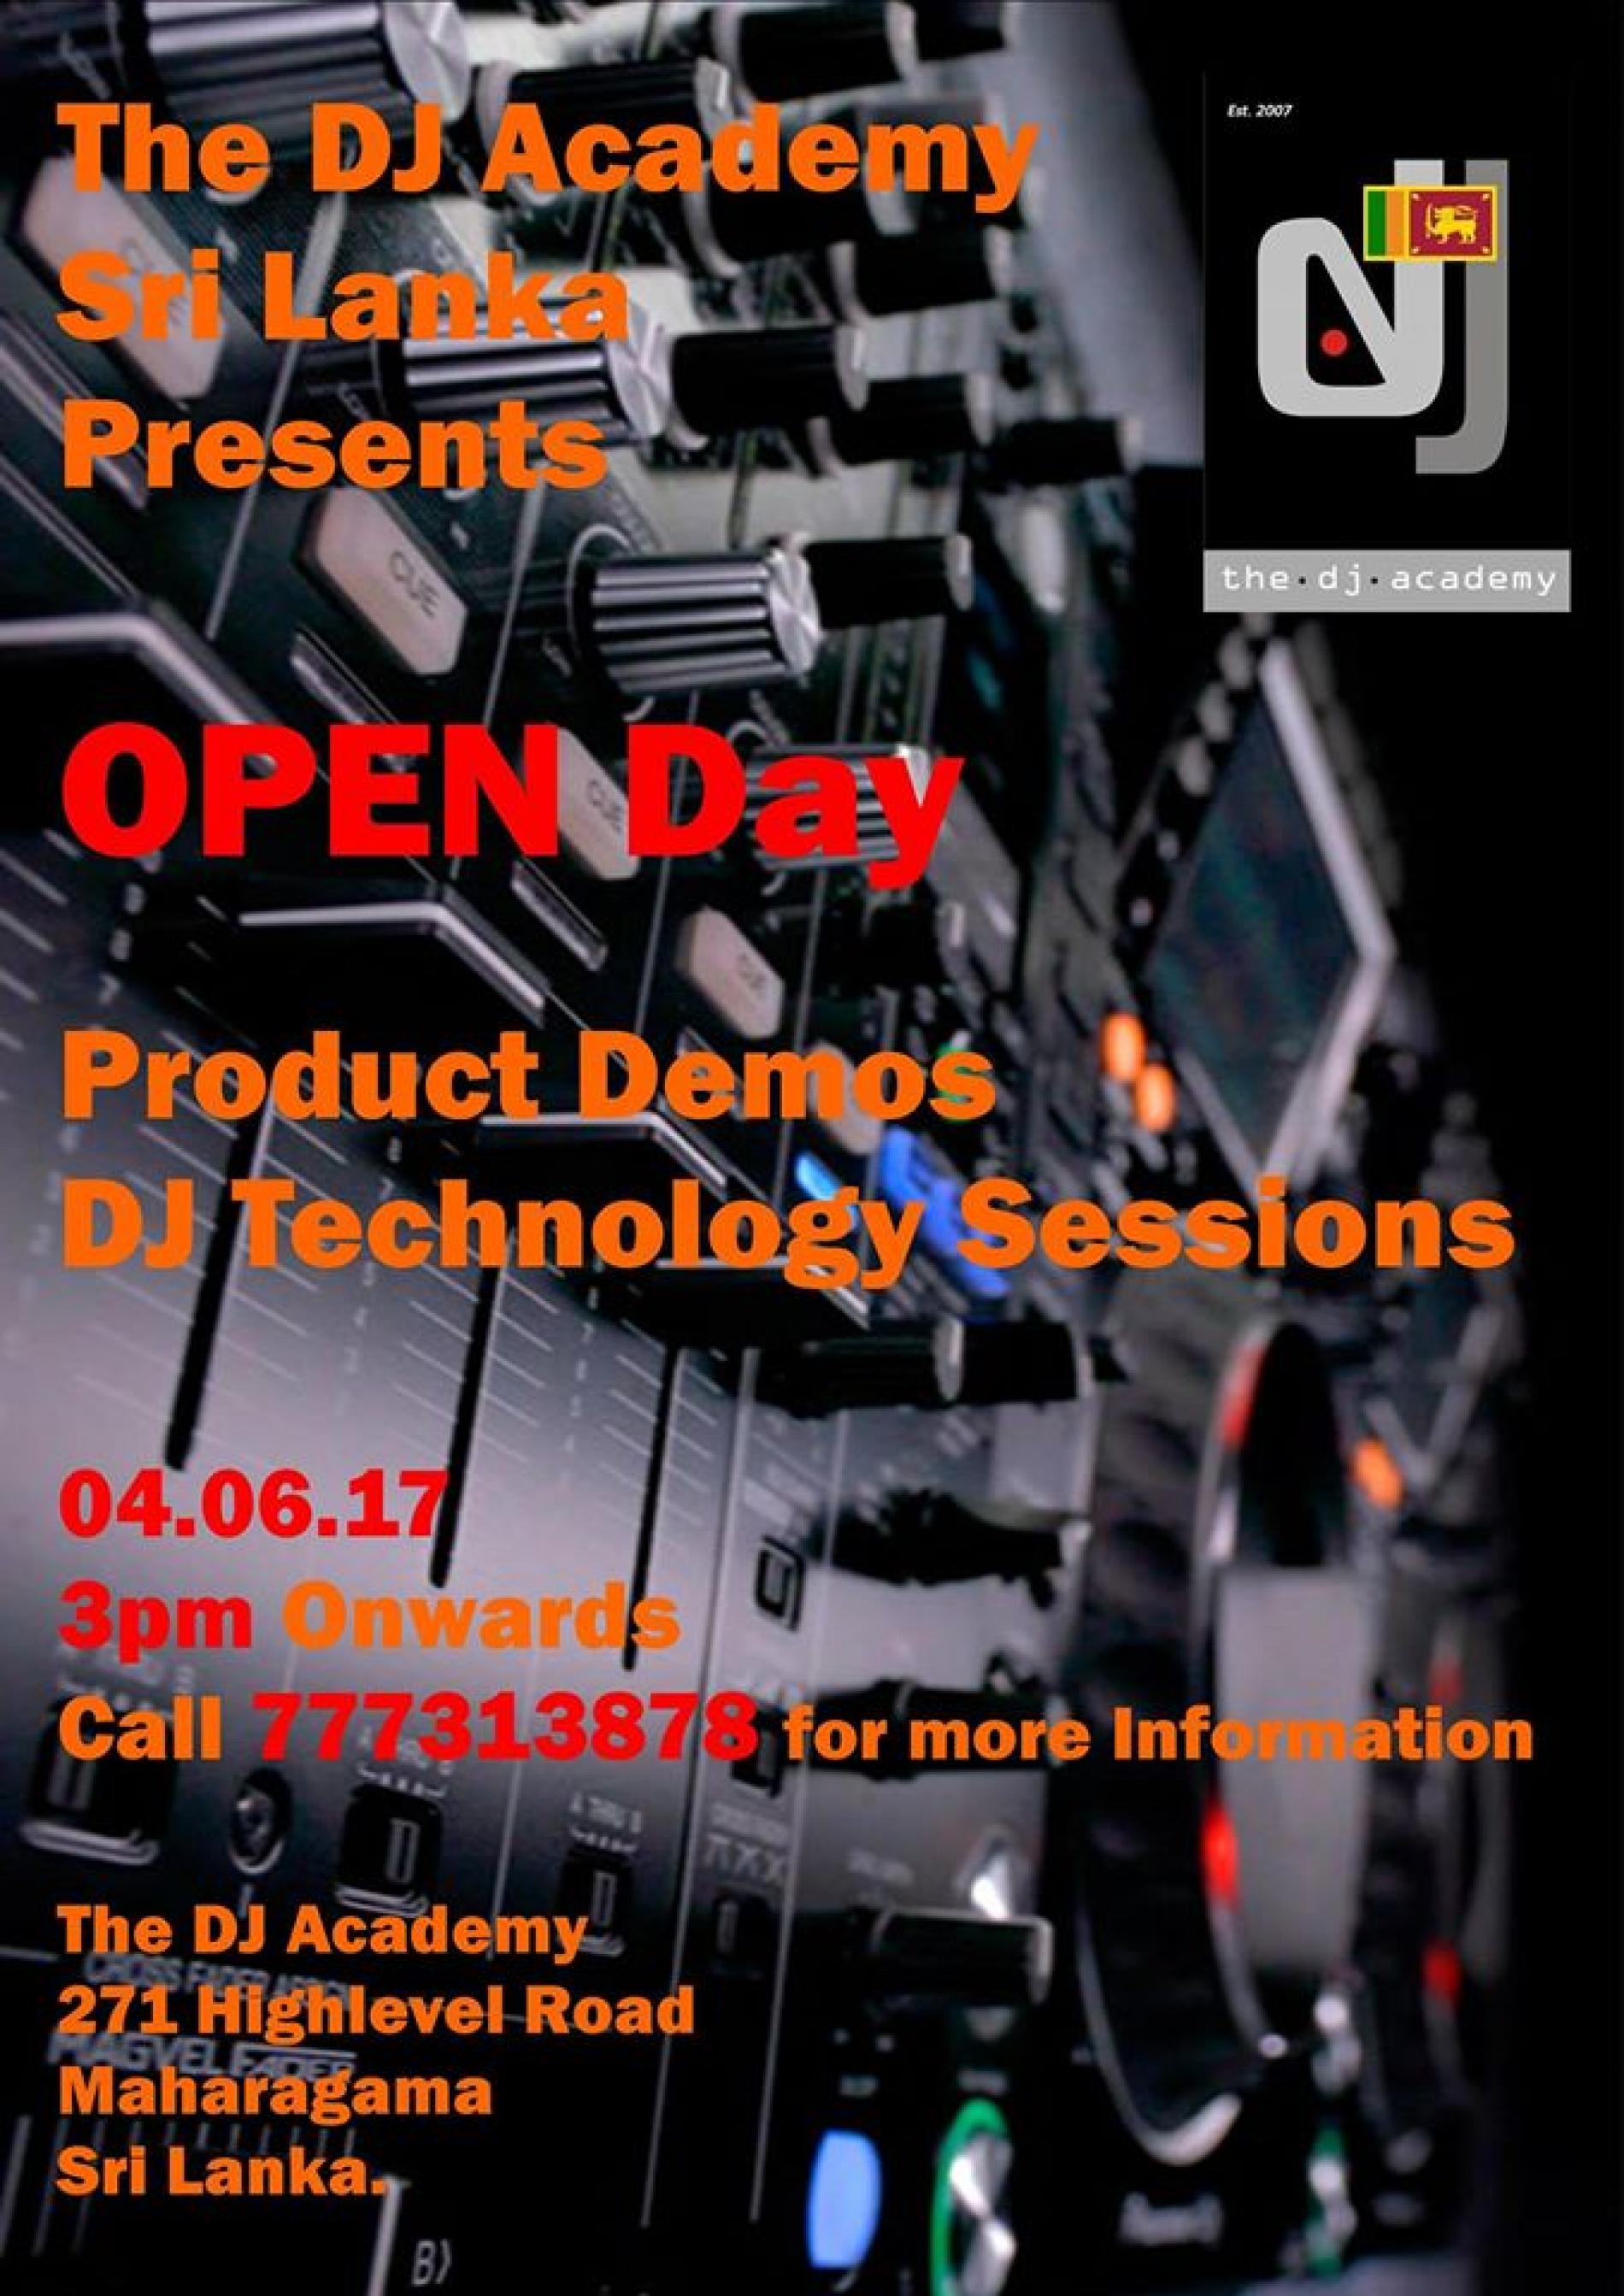 The DJ Academy Open Day